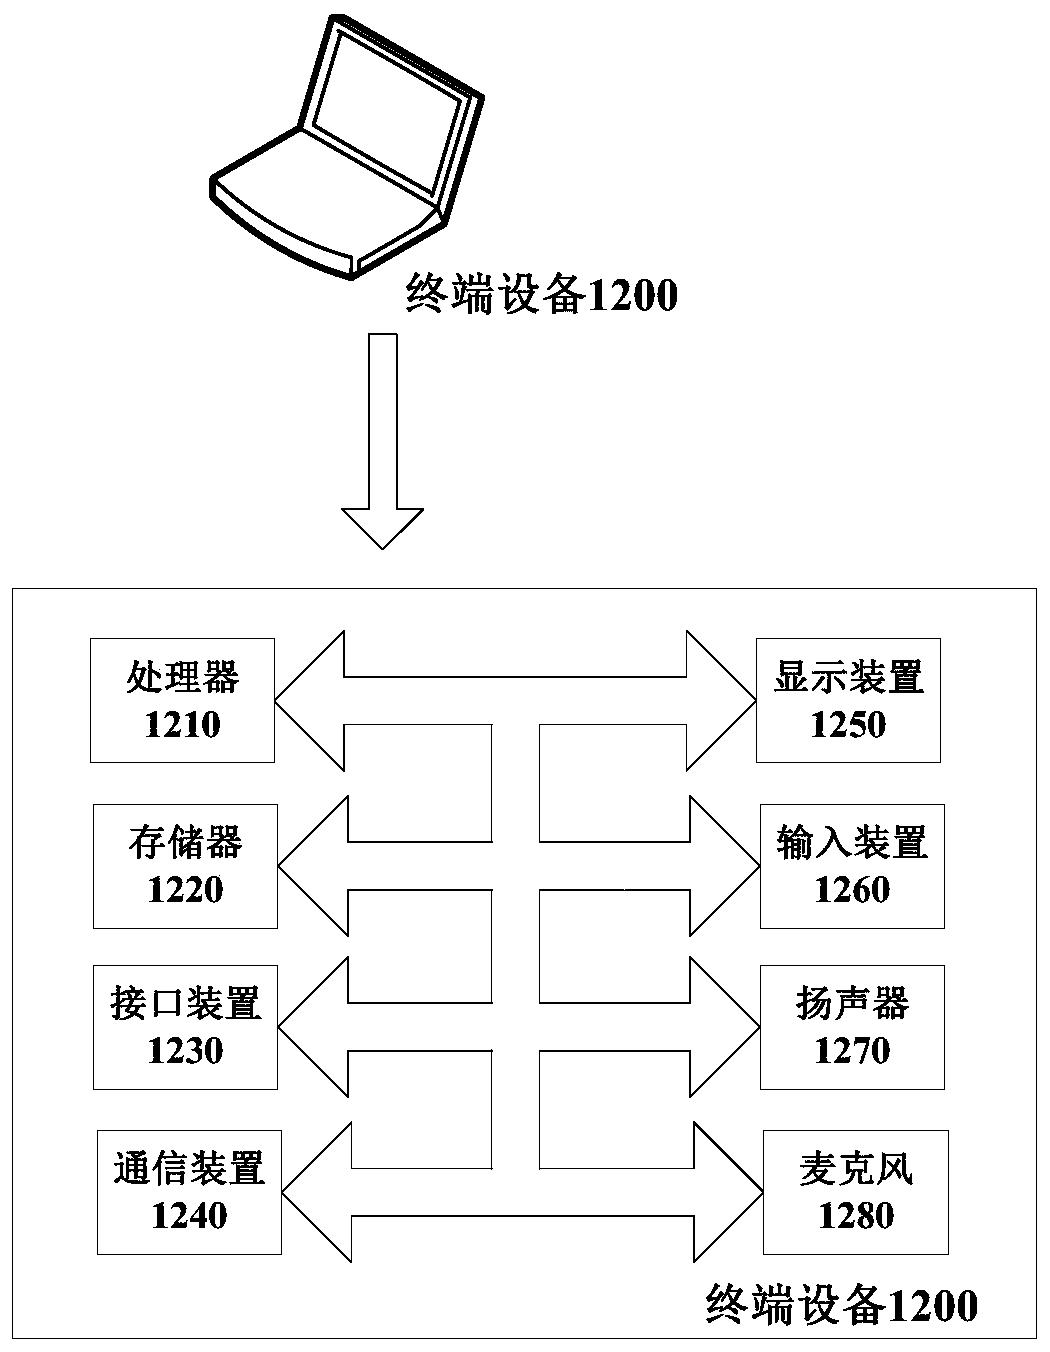 Personnel scheduling method and computer equipment